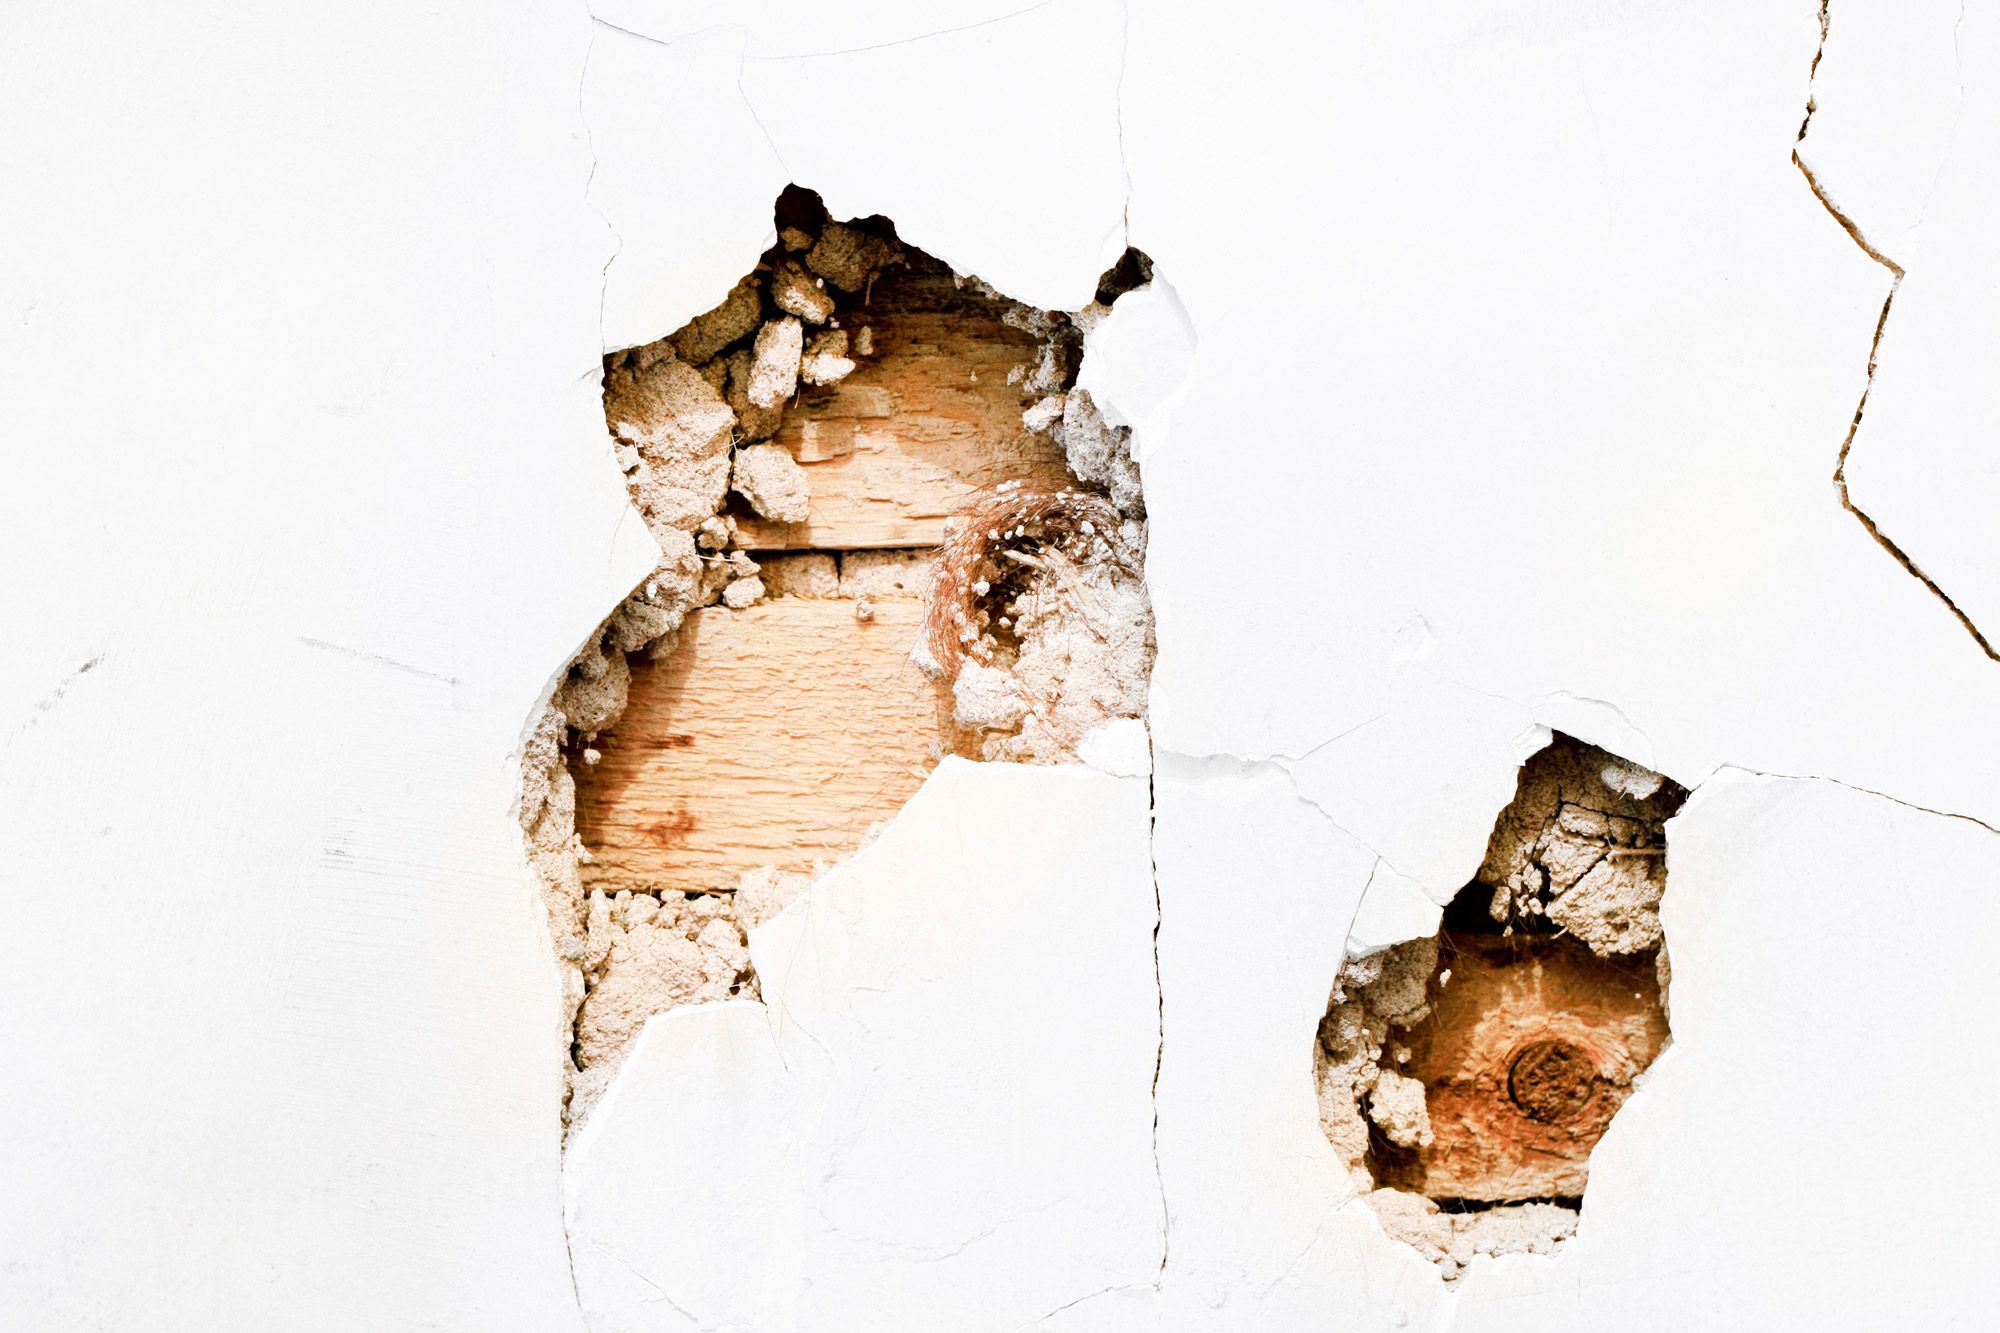 How to Fix Holes or Cracks in Plaster